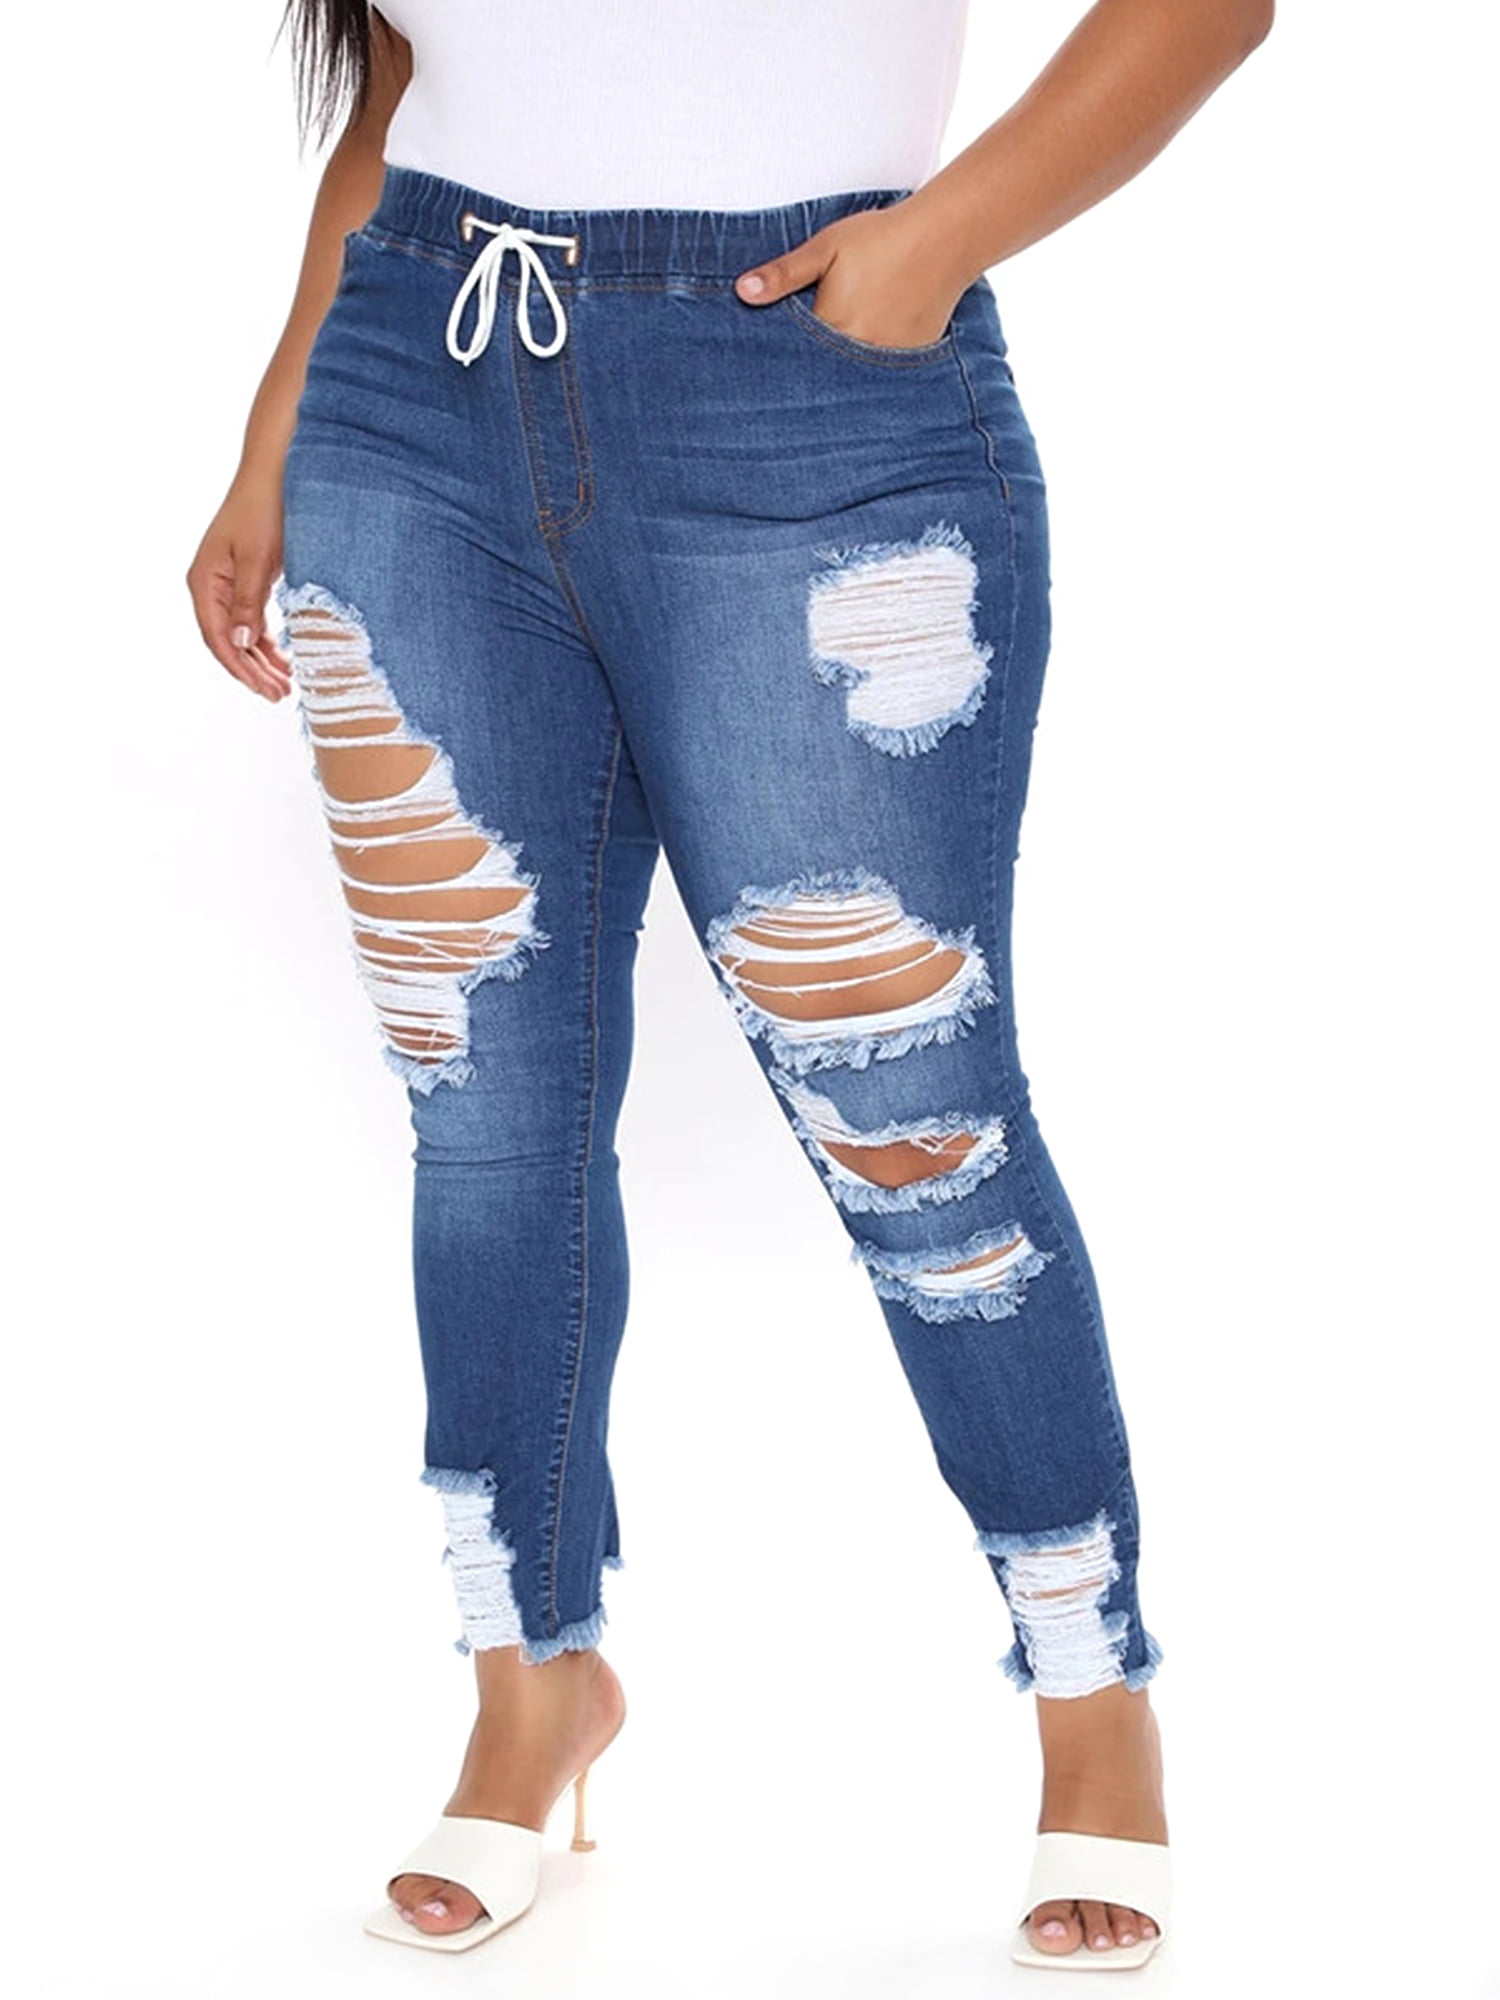 Resfeber Women's High Waisted Skinny Jeans Ripped Stretch Distressed Jeans with Holes